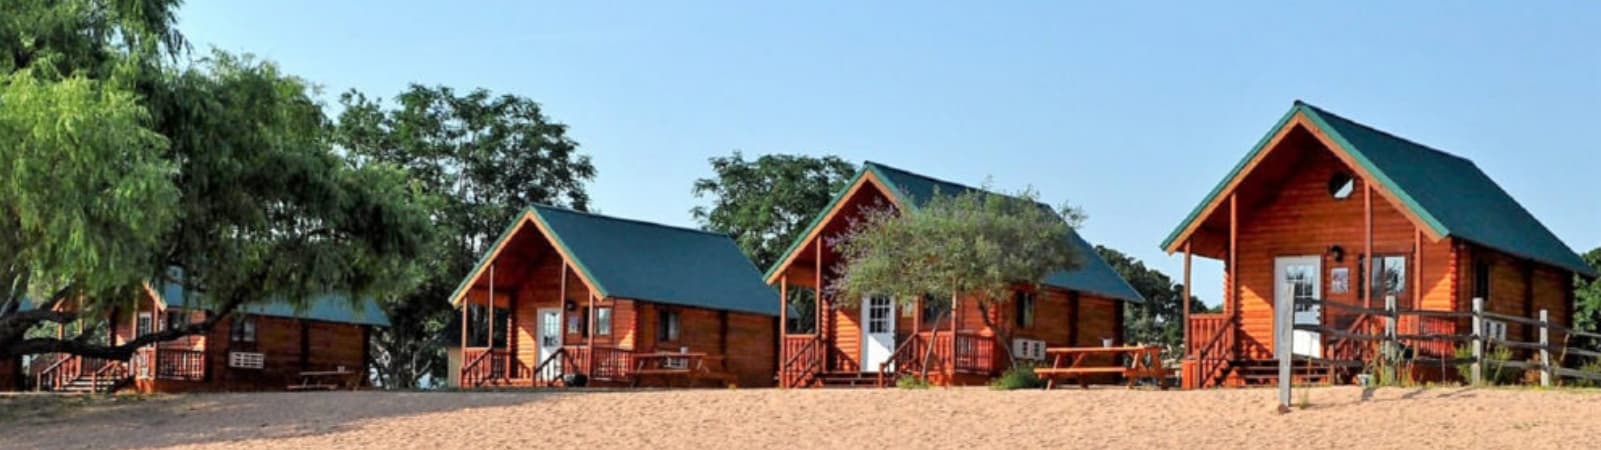 Image of the exterior of our Texas lake cabins at Willow Point Resort. Our family-friendly lake resort features 11 identical waterfront cabins.